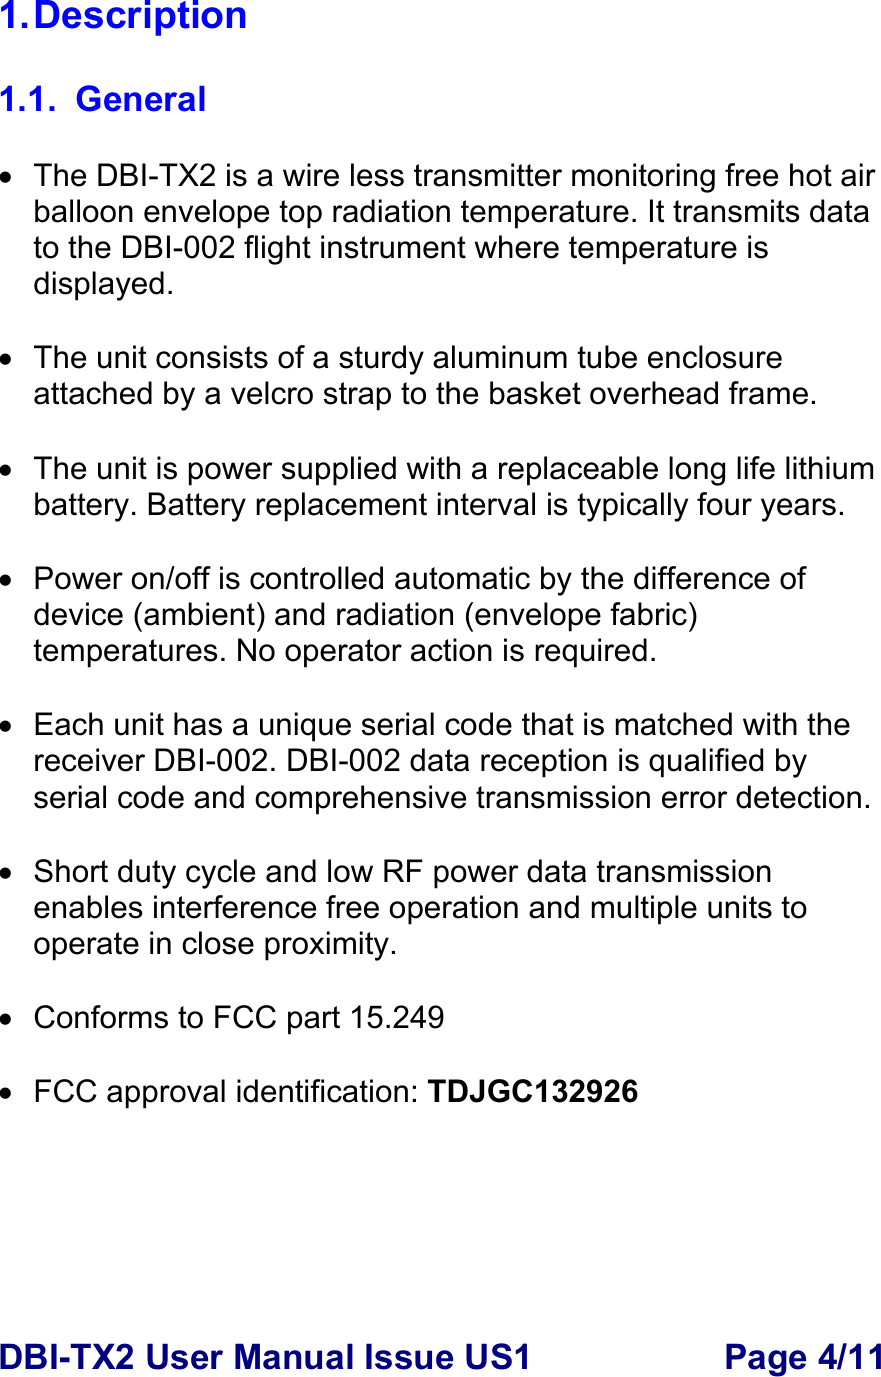 DBI-TX2 User Manual Issue US1  Page 4/11 1. Description  1.1. General  •  The DBI-TX2 is a wire less transmitter monitoring free hot air balloon envelope top radiation temperature. It transmits data to the DBI-002 flight instrument where temperature is displayed.  •  The unit consists of a sturdy aluminum tube enclosure attached by a velcro strap to the basket overhead frame.   •  The unit is power supplied with a replaceable long life lithium battery. Battery replacement interval is typically four years.  •  Power on/off is controlled automatic by the difference of device (ambient) and radiation (envelope fabric) temperatures. No operator action is required.    •  Each unit has a unique serial code that is matched with the receiver DBI-002. DBI-002 data reception is qualified by serial code and comprehensive transmission error detection.      •  Short duty cycle and low RF power data transmission enables interference free operation and multiple units to operate in close proximity.   •  Conforms to FCC part 15.249  •  FCC approval identification: TDJGC132926 